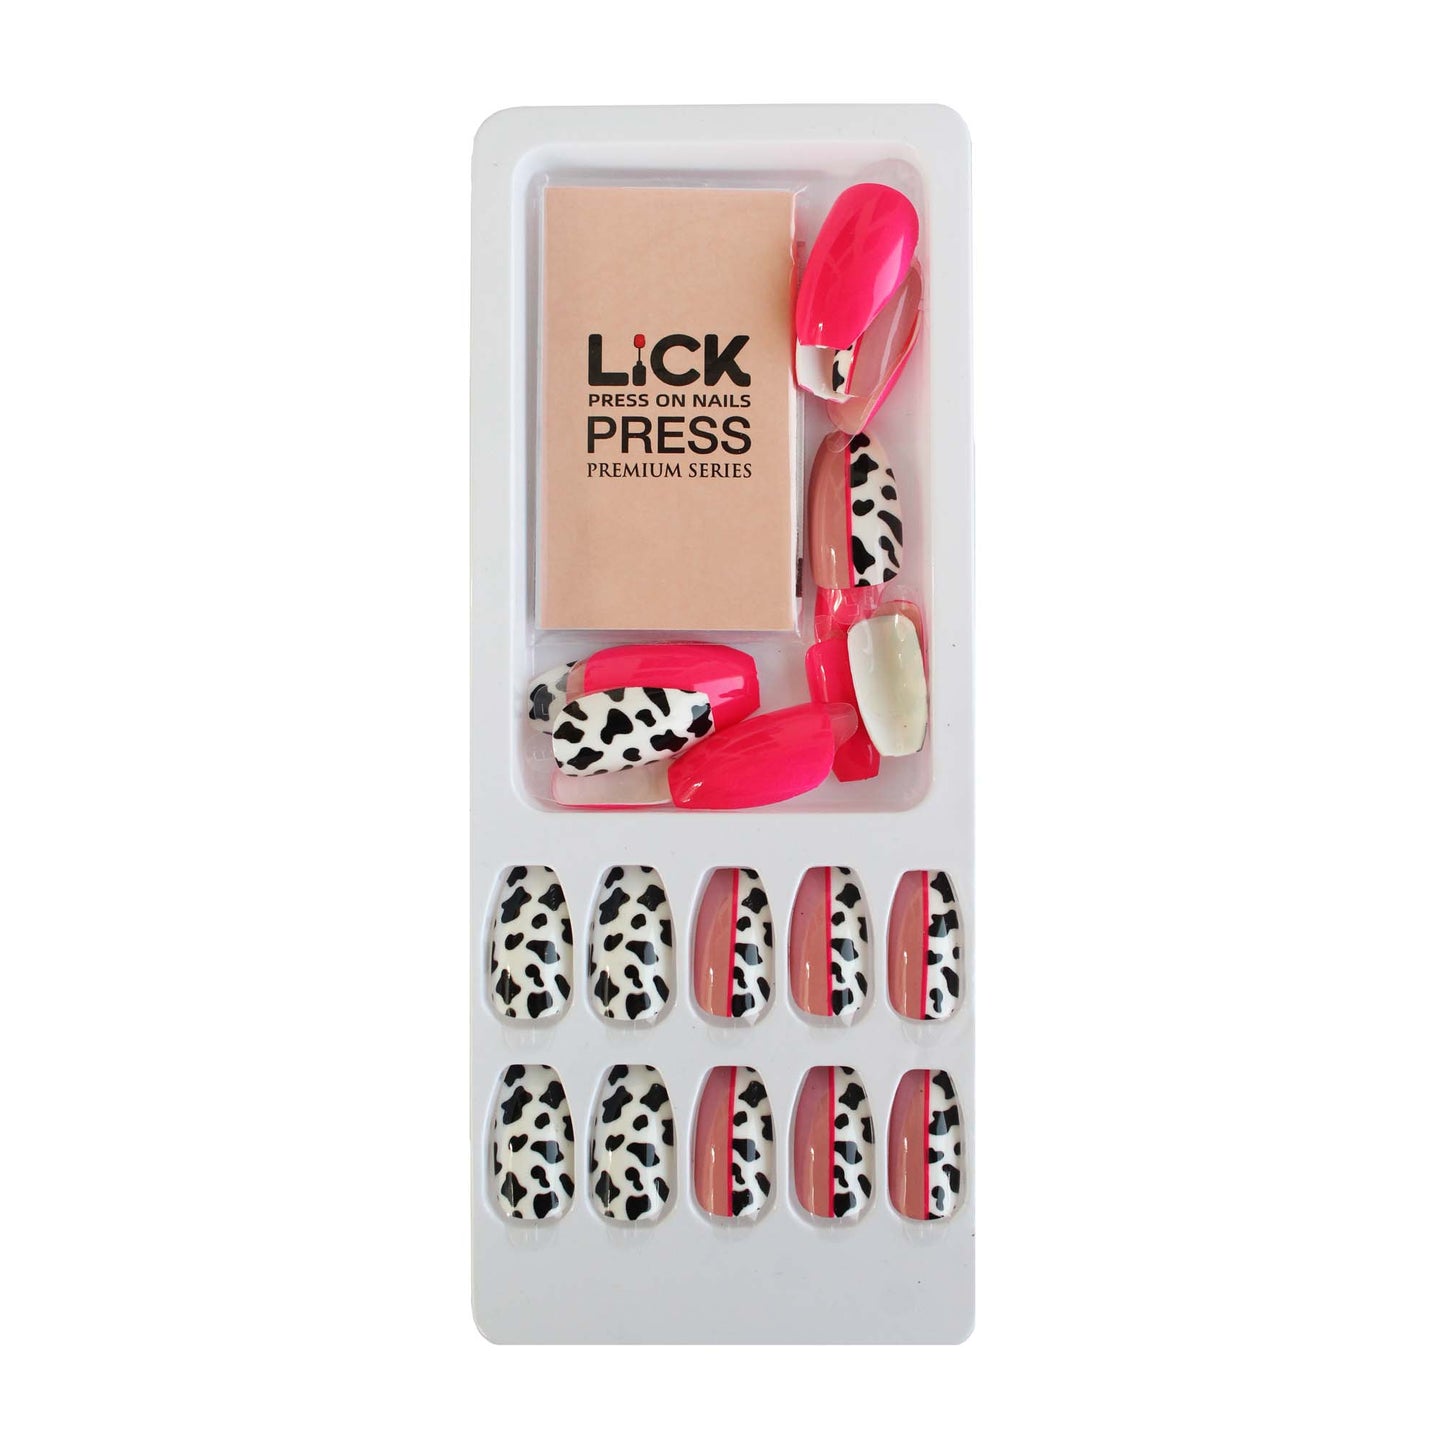 LICK NAILS French Manicure Studded Press on Nails